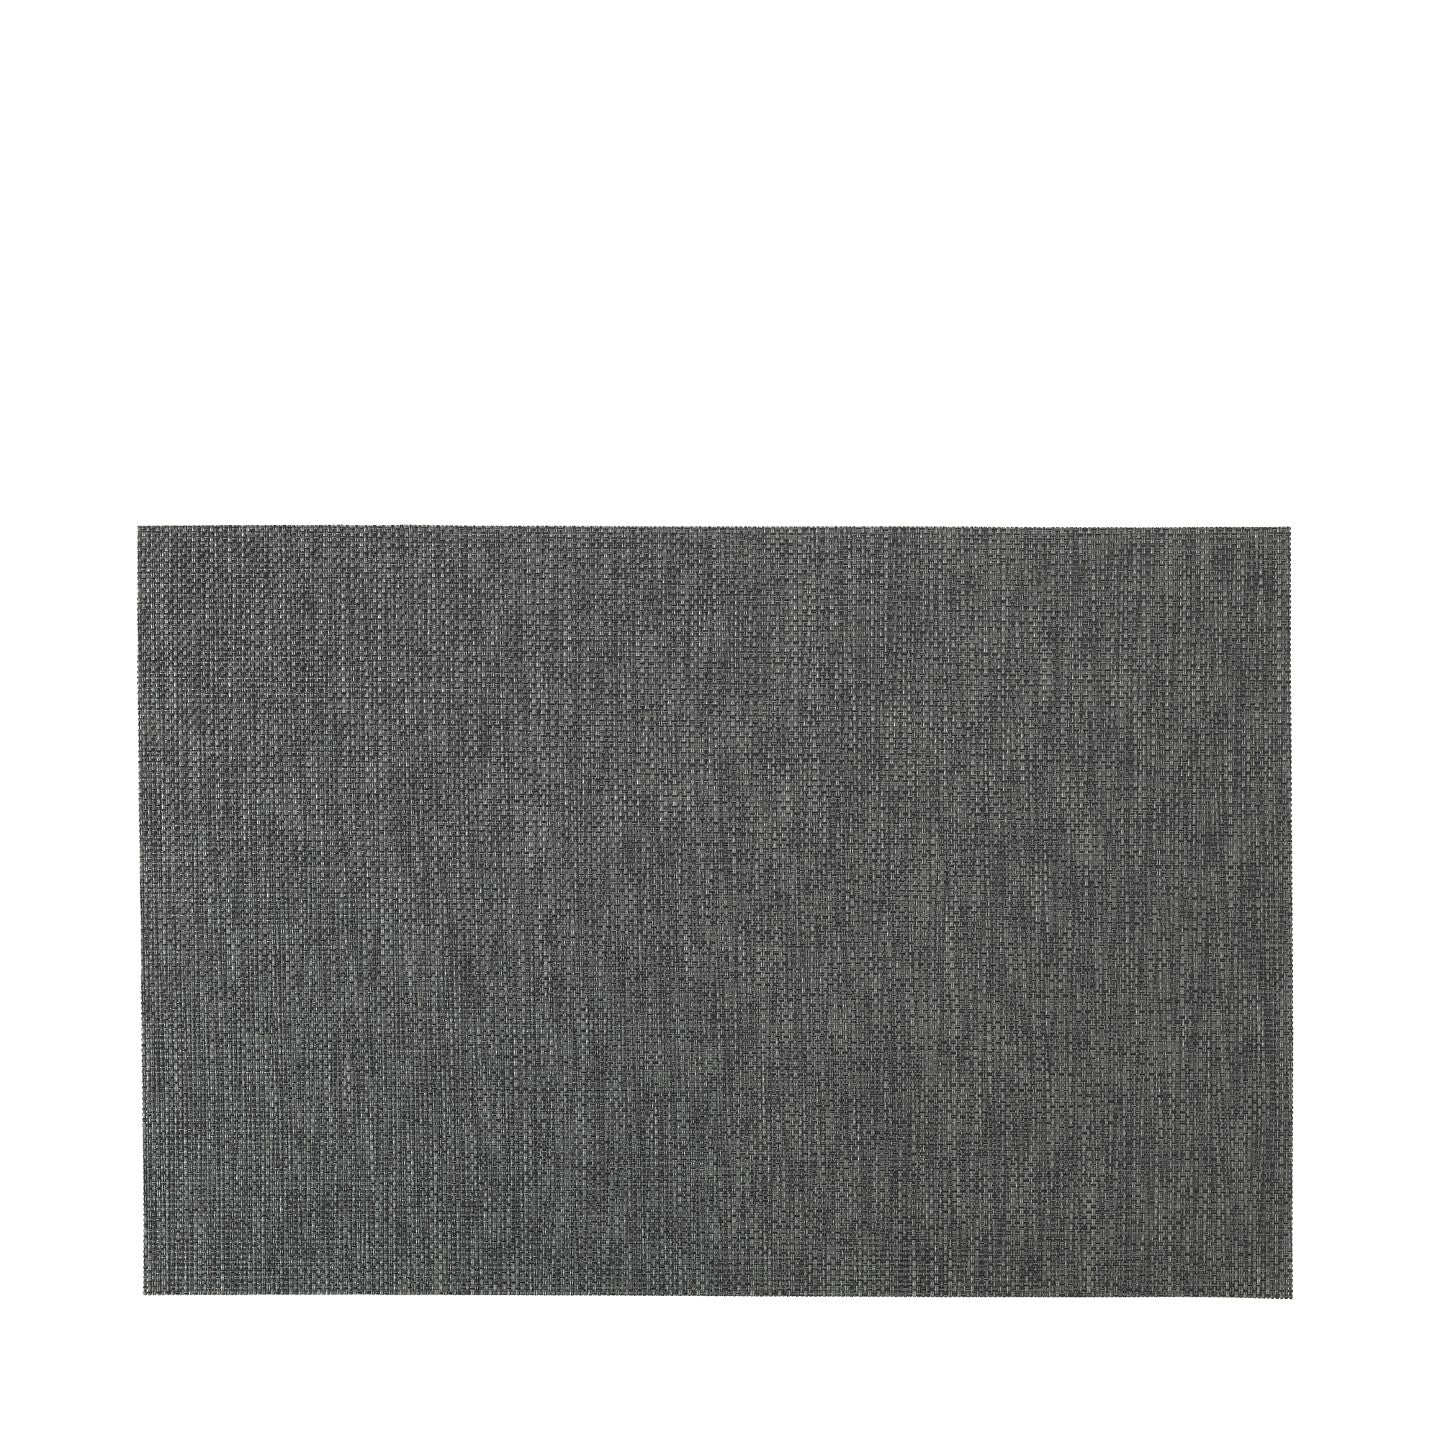 SITO PLACEMATS - SET OF 4*